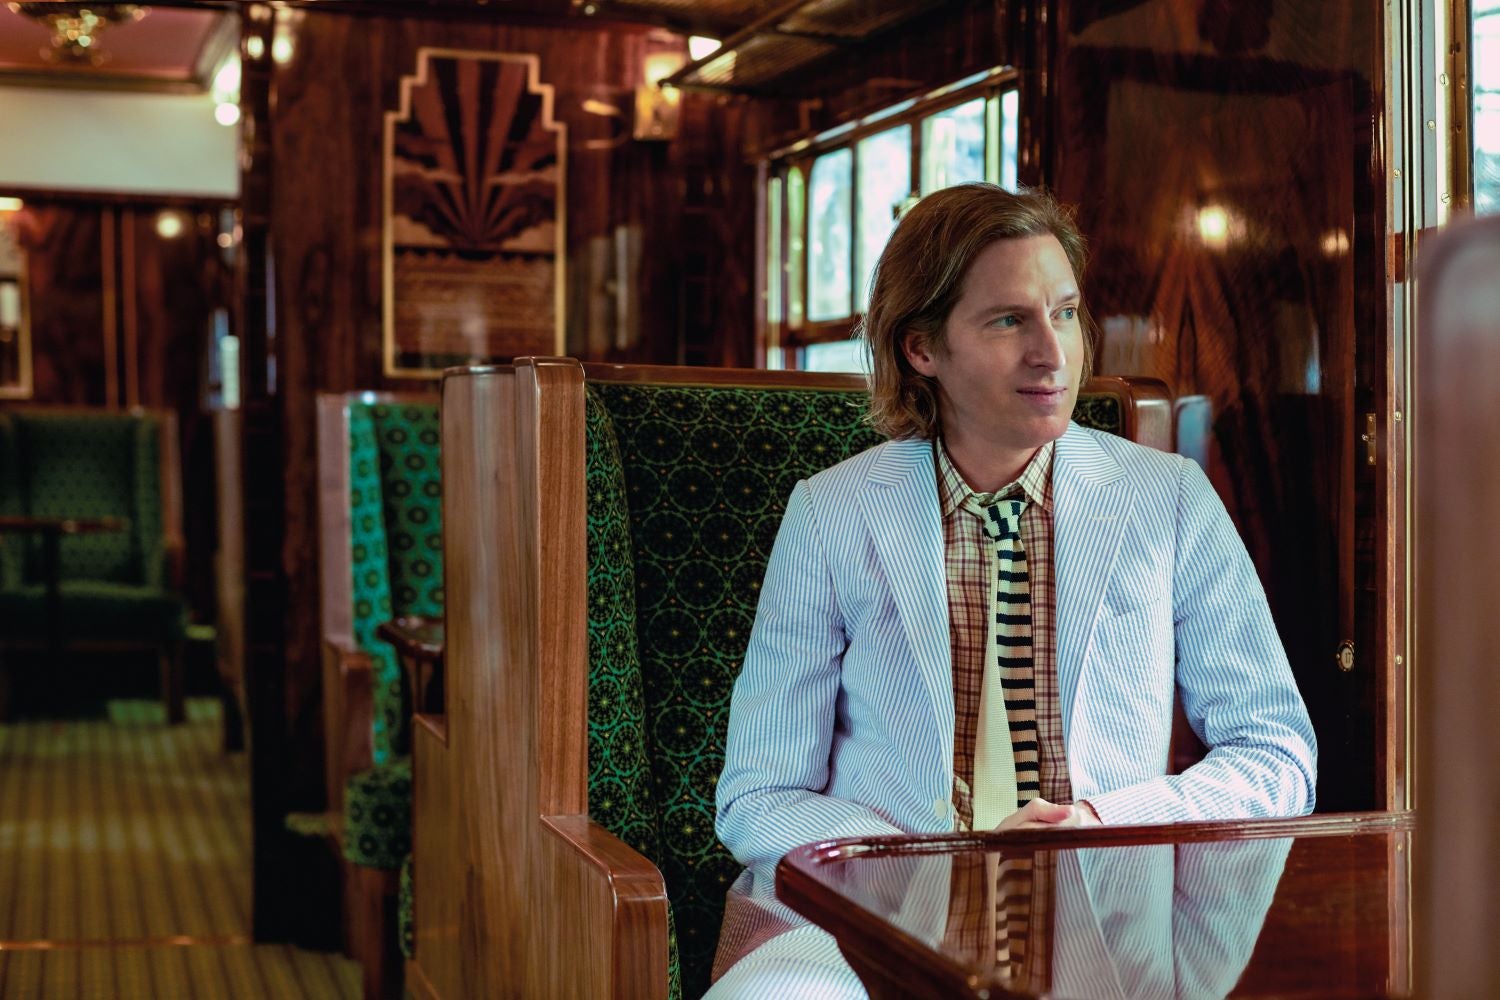 Wes Anderson Train